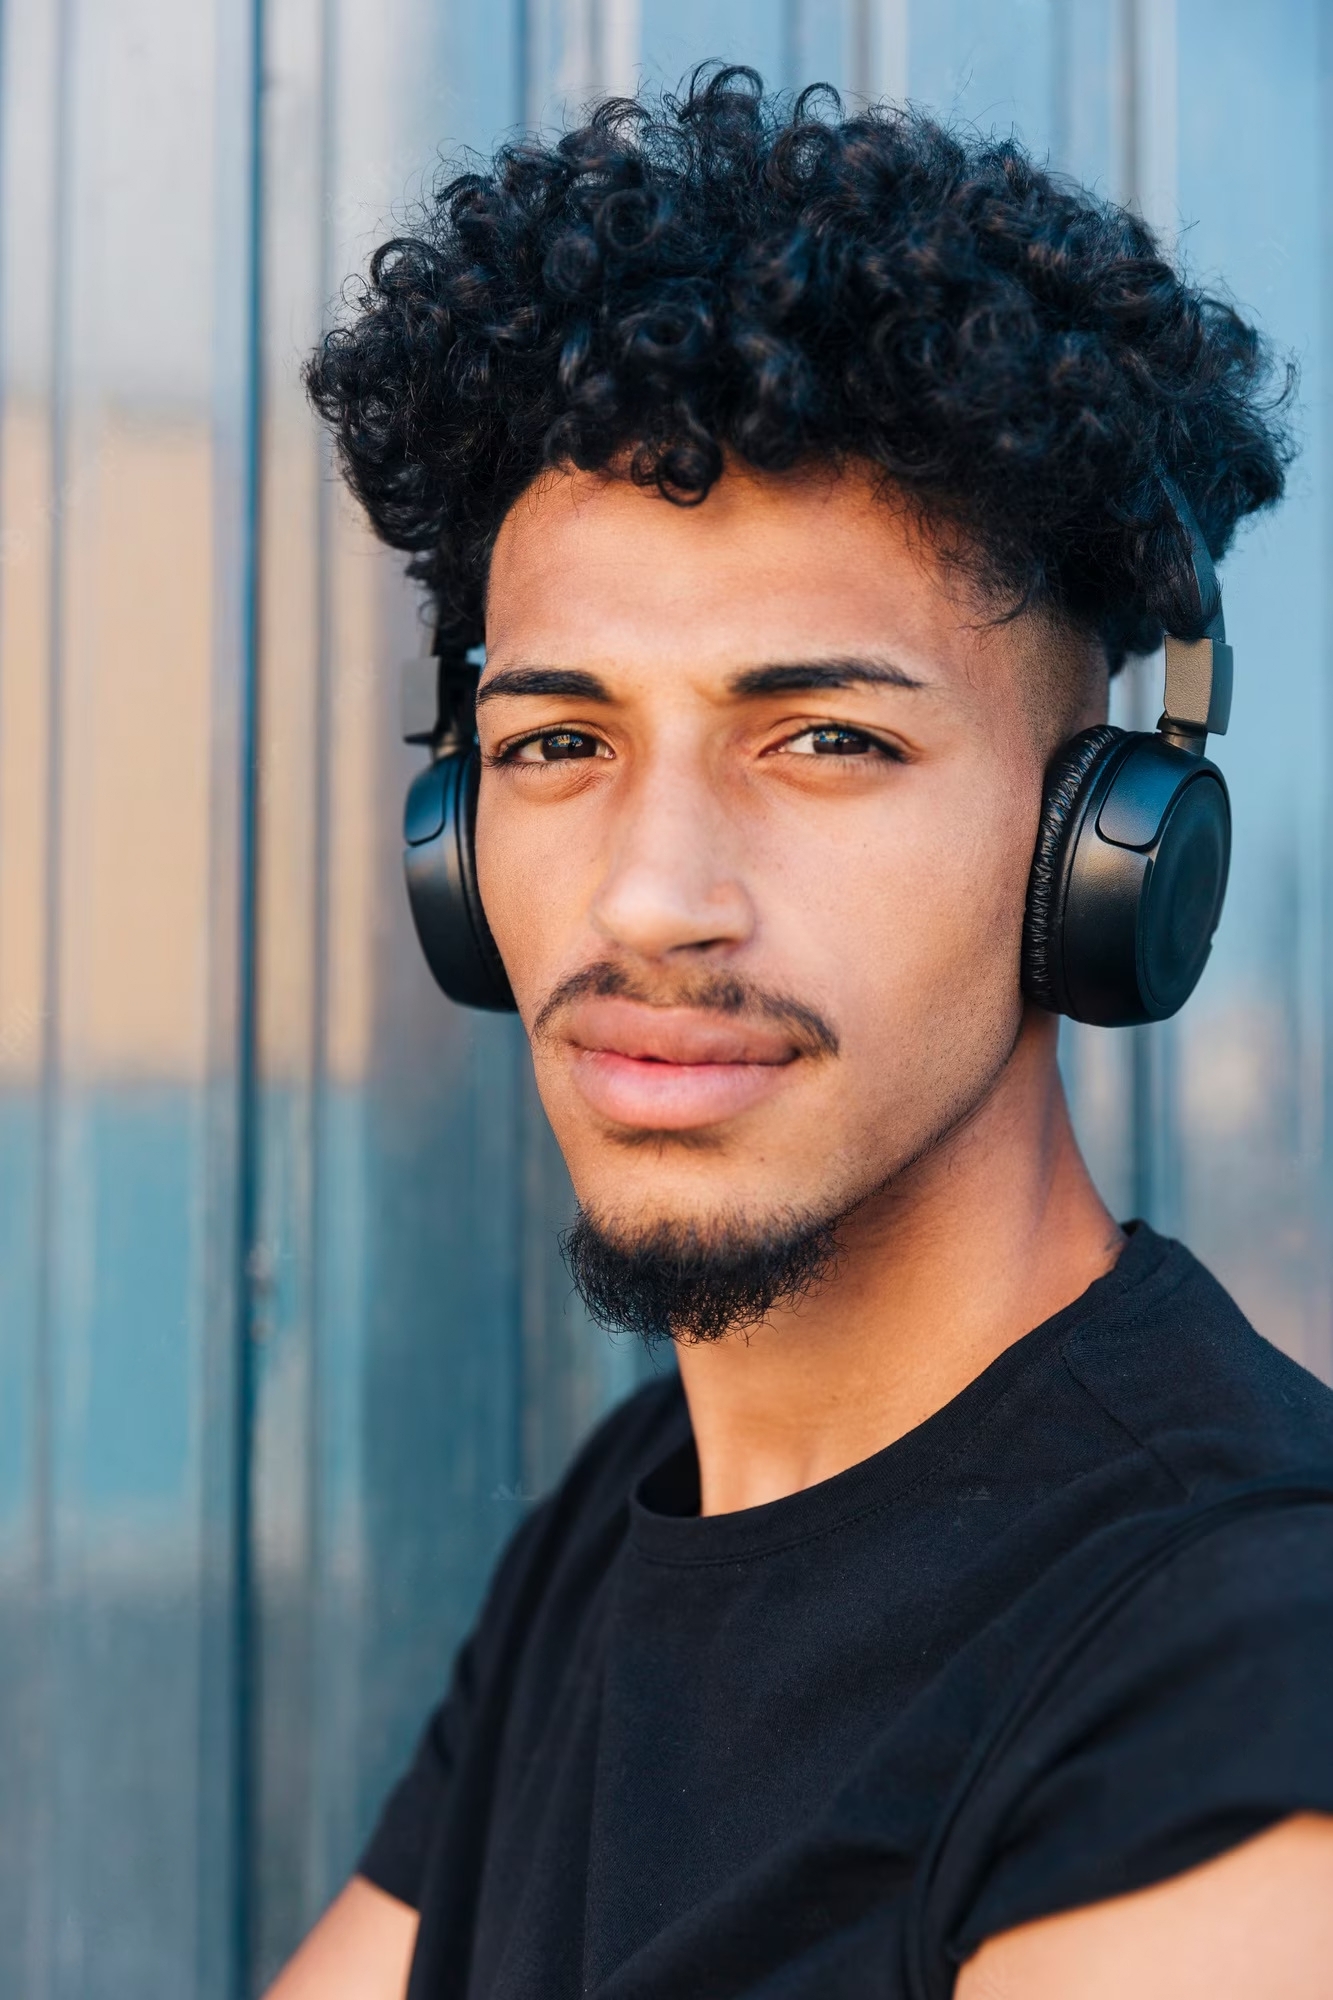 A man with curly hair wearing headphone